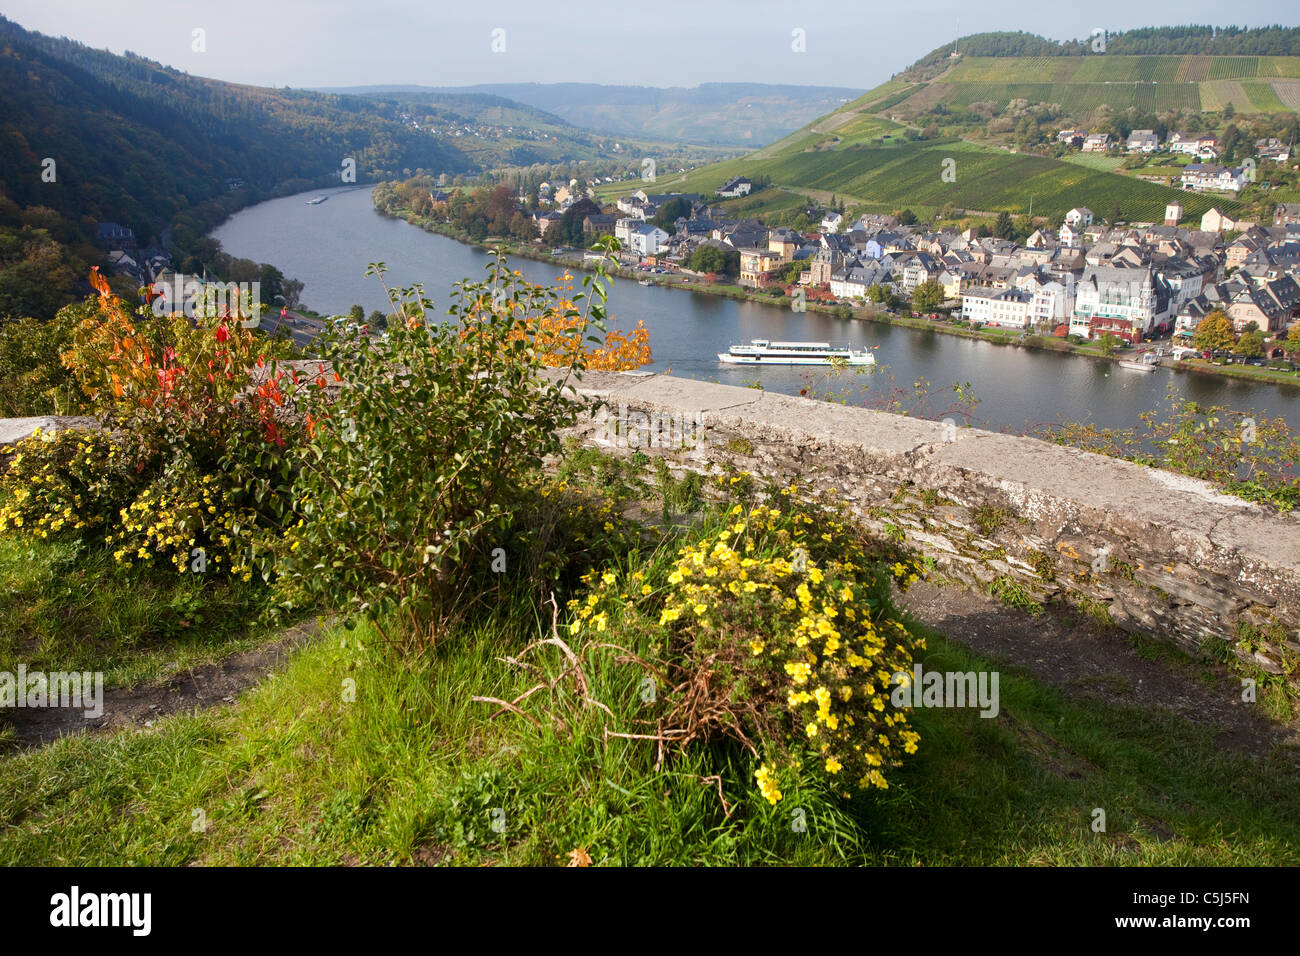 Die Mosel bei Traben-Trarbach, Herbst, Moselle at Traben-Trabach, autumn Stock Photo